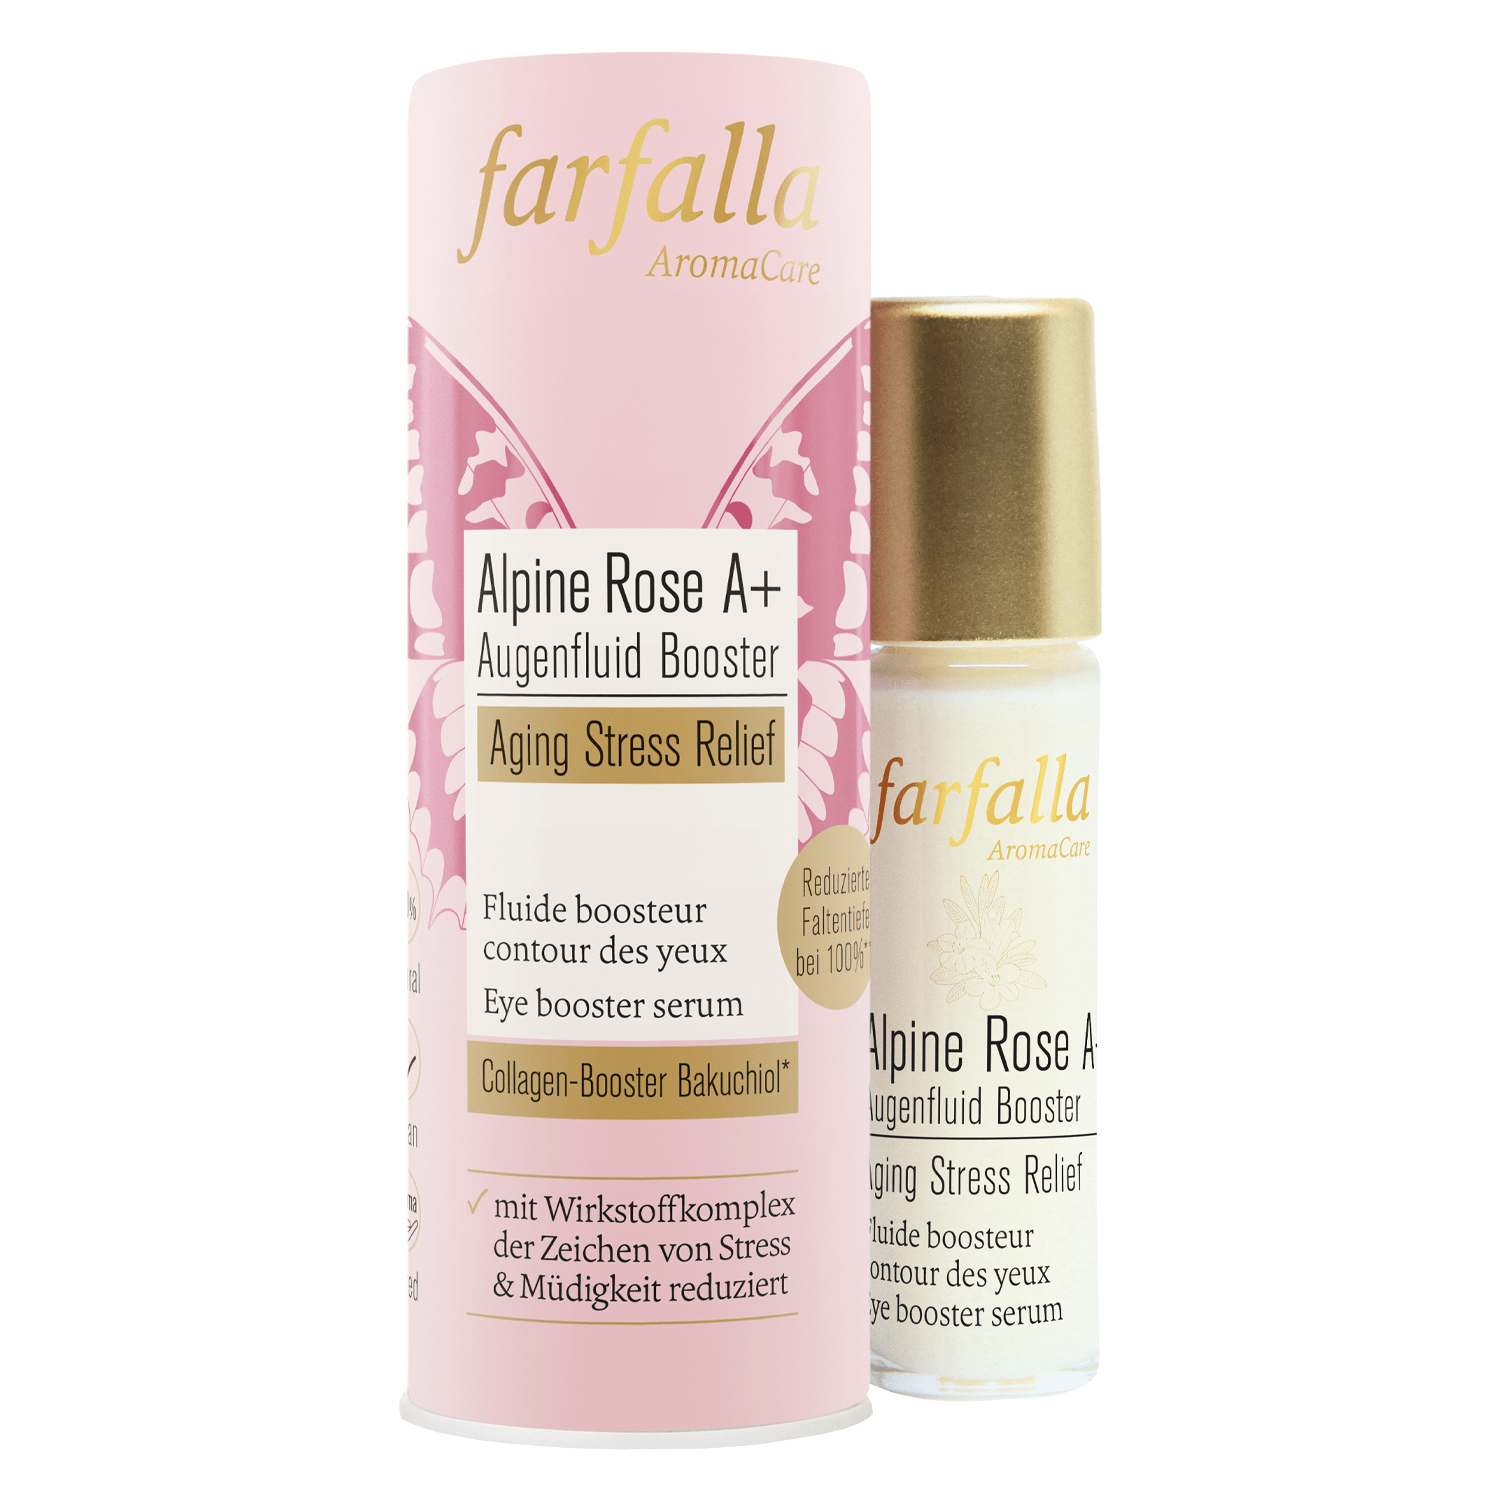 Product image from Farfalla Care - Alpine Rose A+ Augenfluid Booster